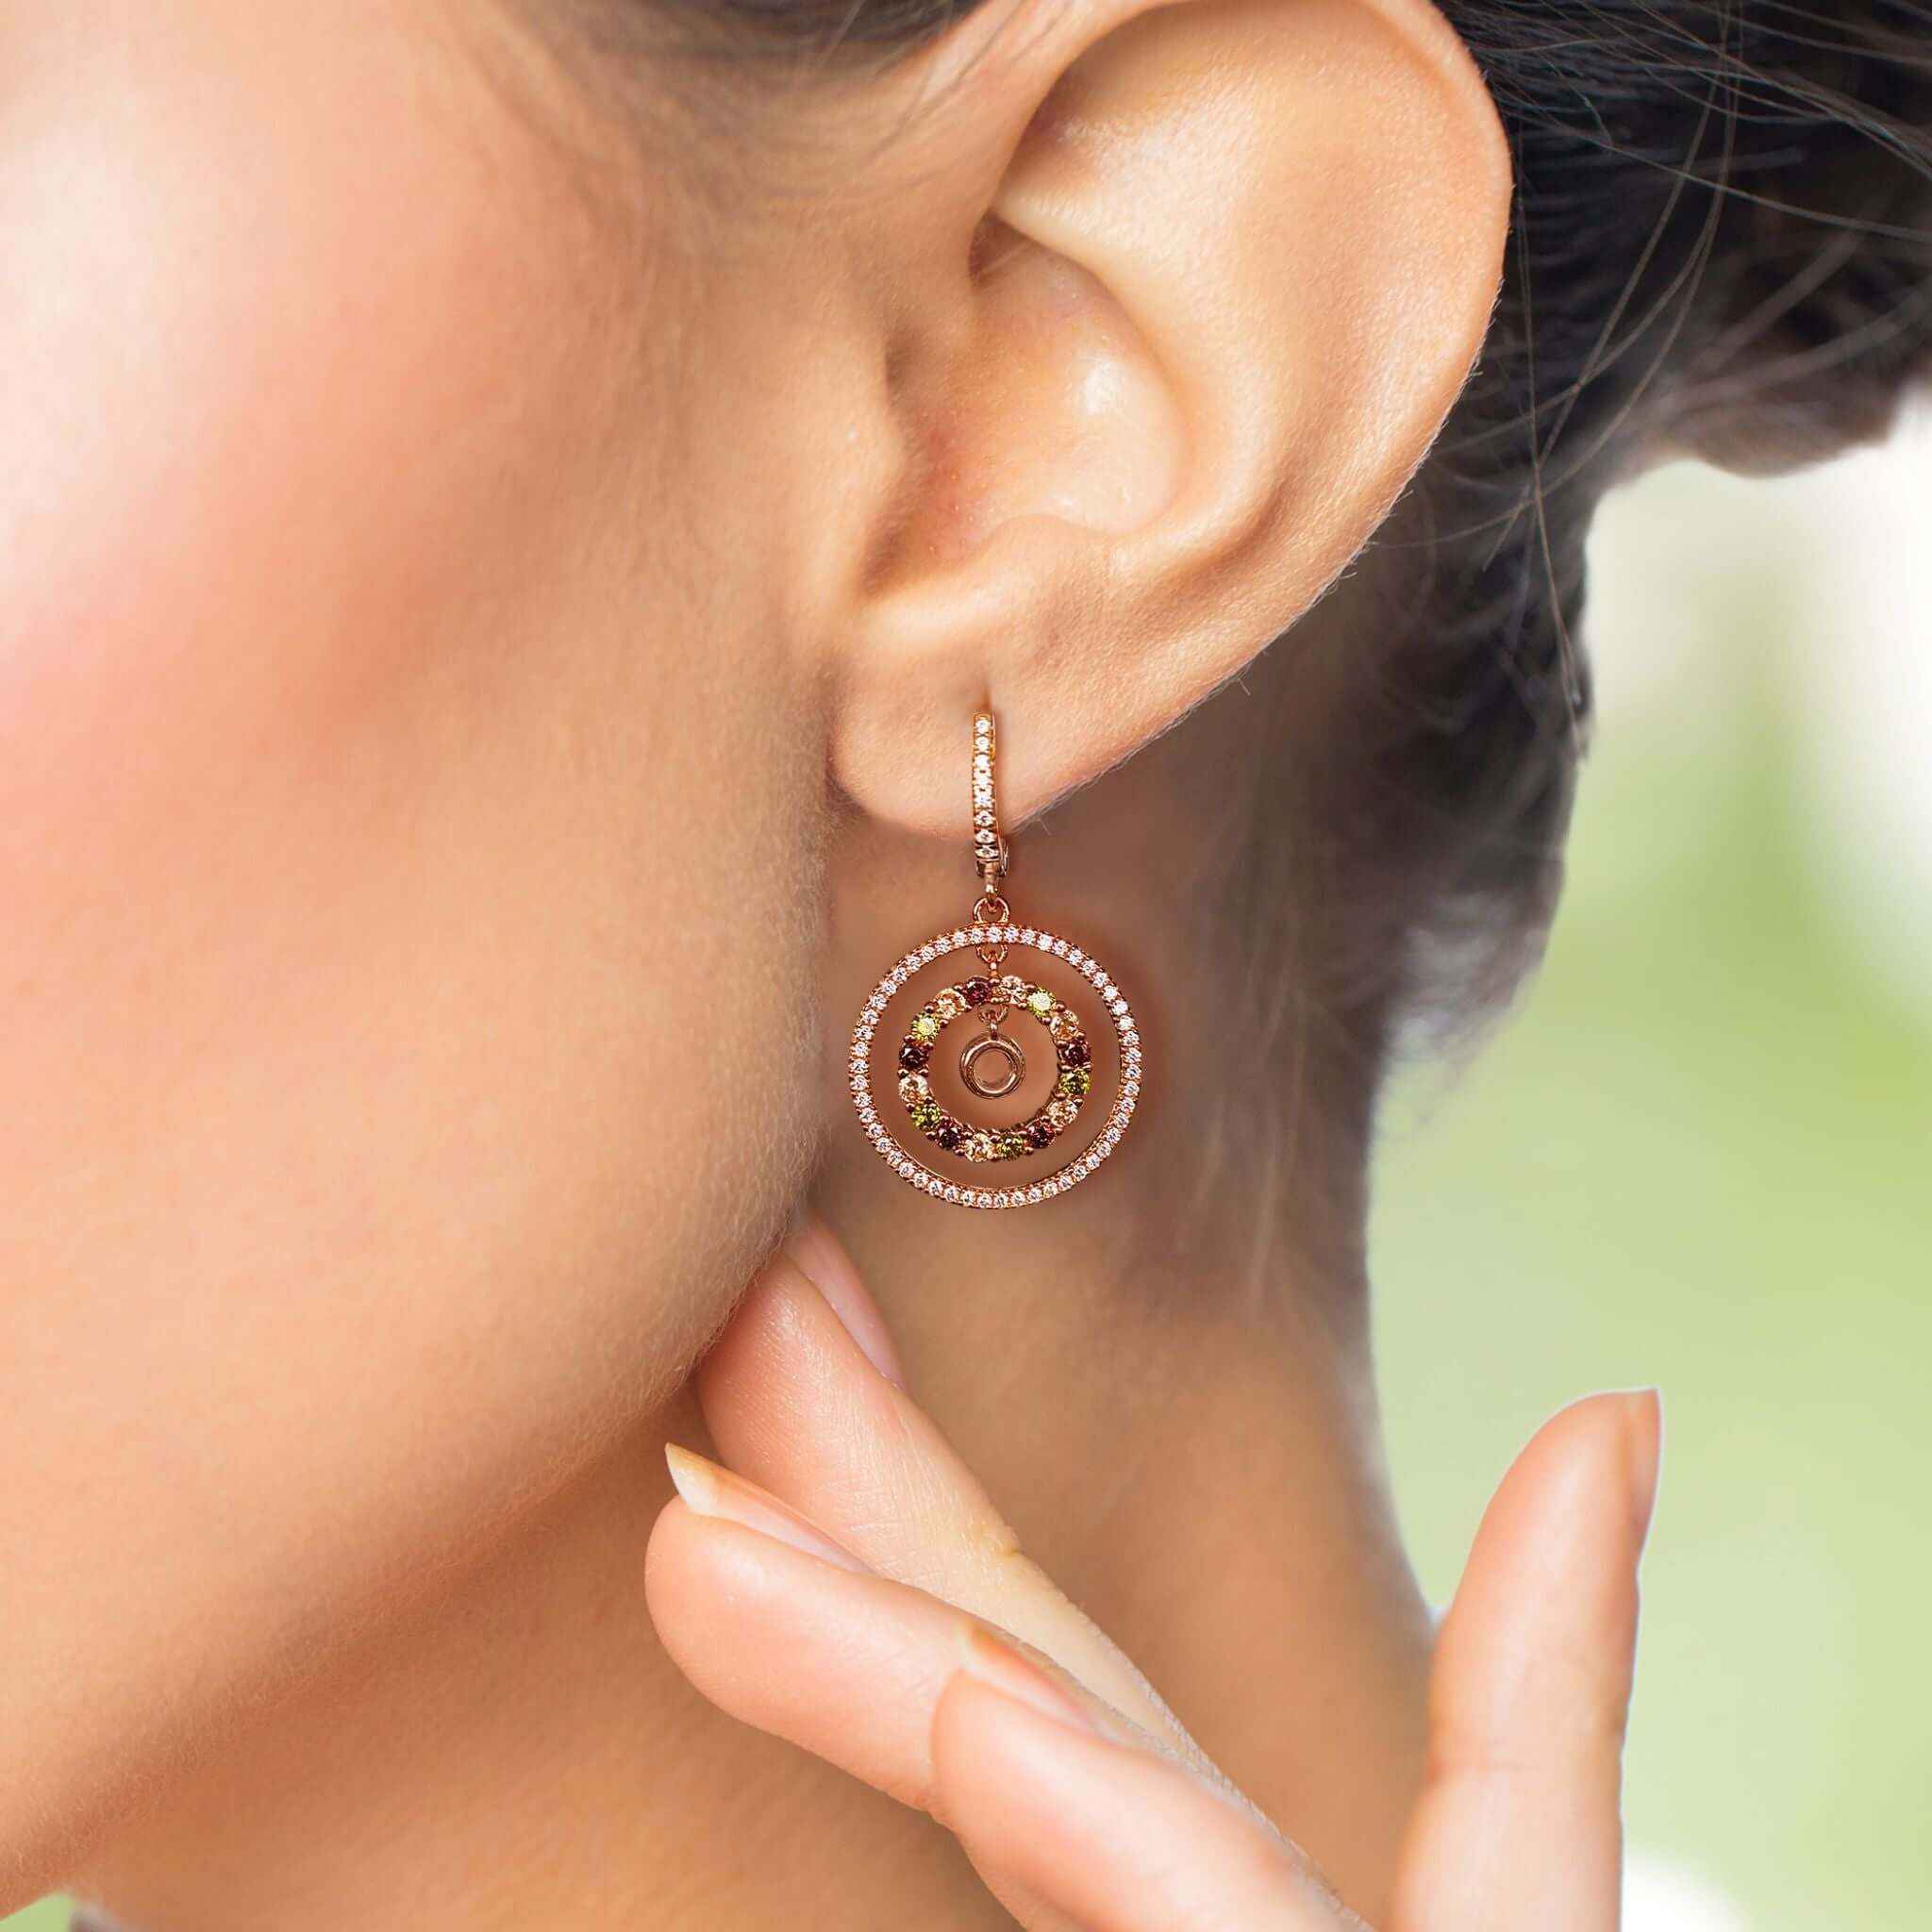 Close-up view of Halo Drop Earrings showcasing the intricate cubic zirconia detailing and rose gold finish.